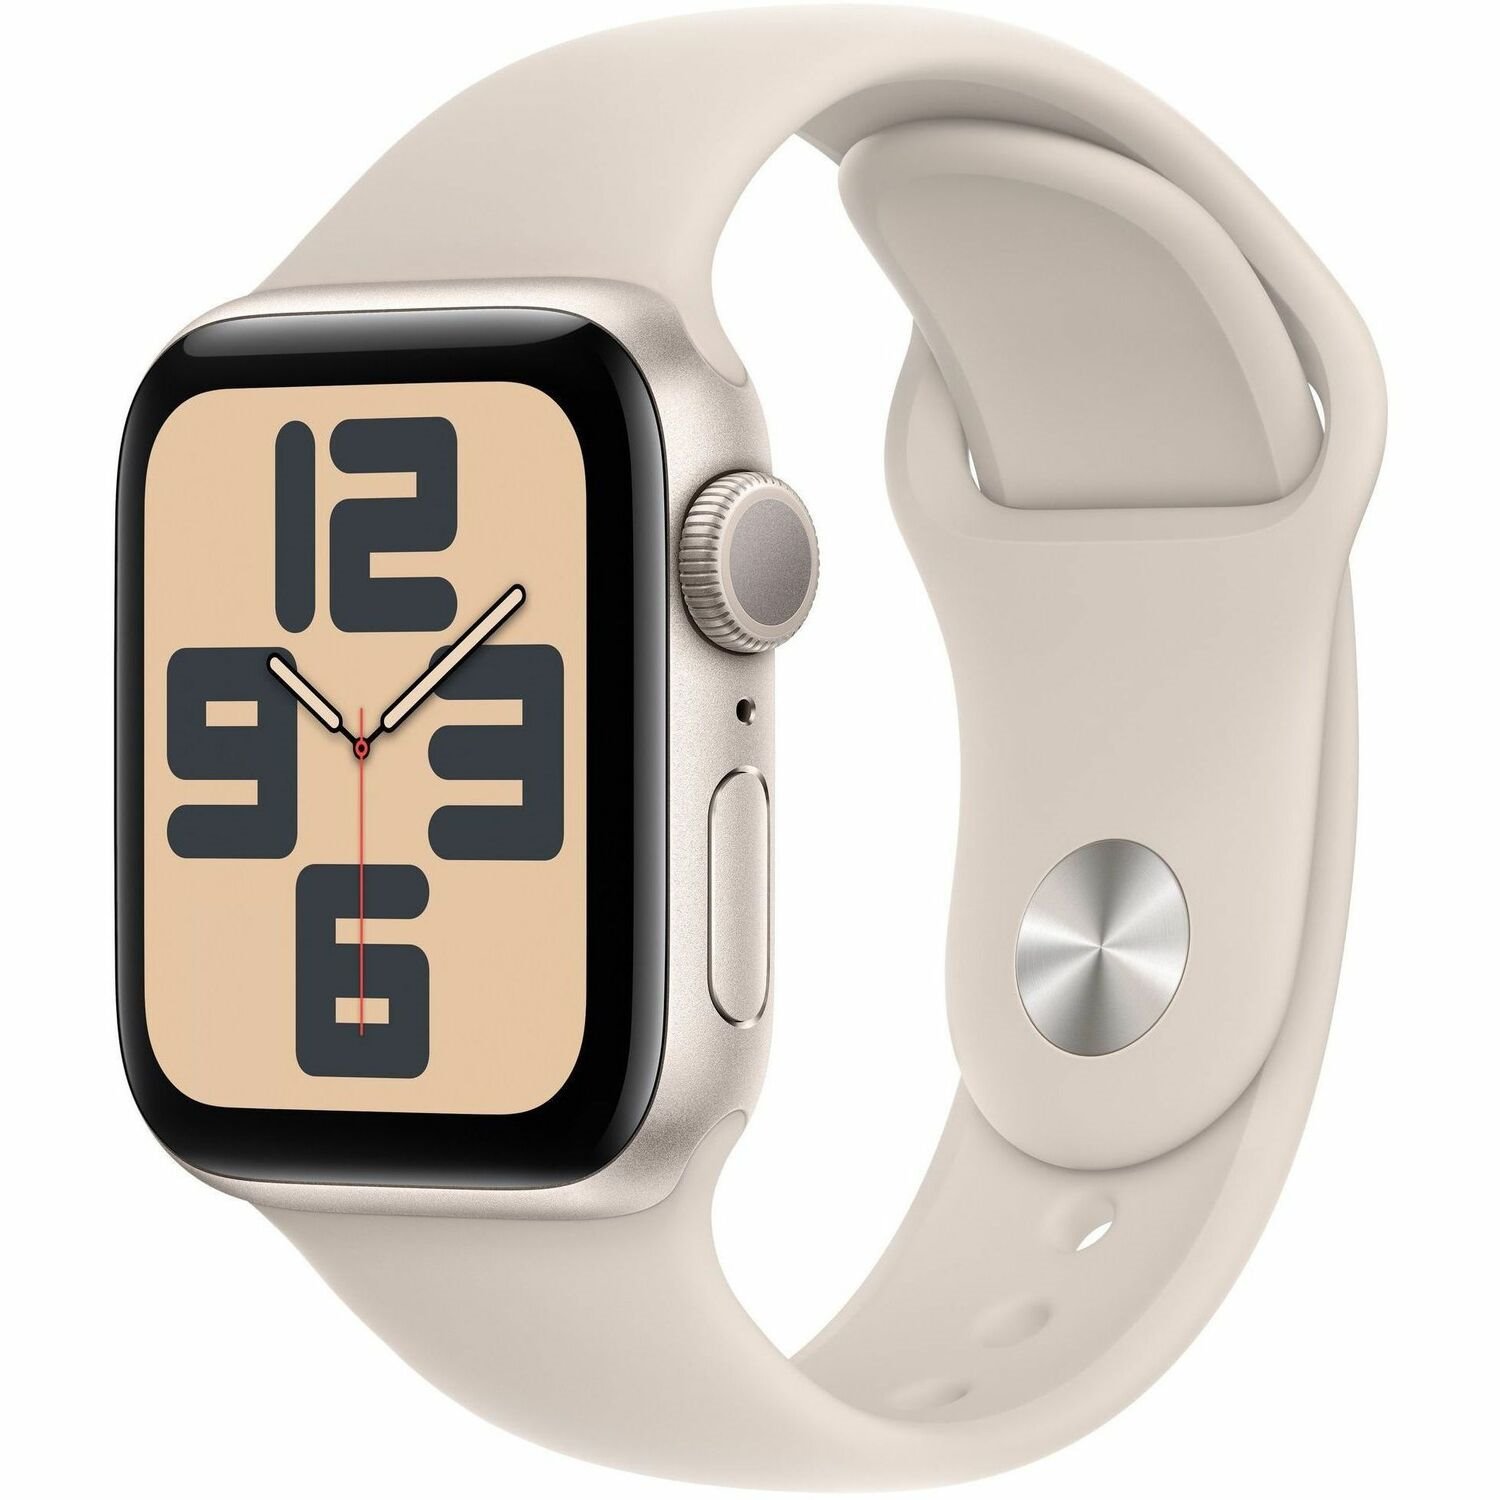 Apple Watch SE Smart Watch - 44 mm Case Height - 38 mm Case Width - Starlight Case Color - Starlight Band Color - Glass Body Material - Aluminium Case Material - Wireless LAN